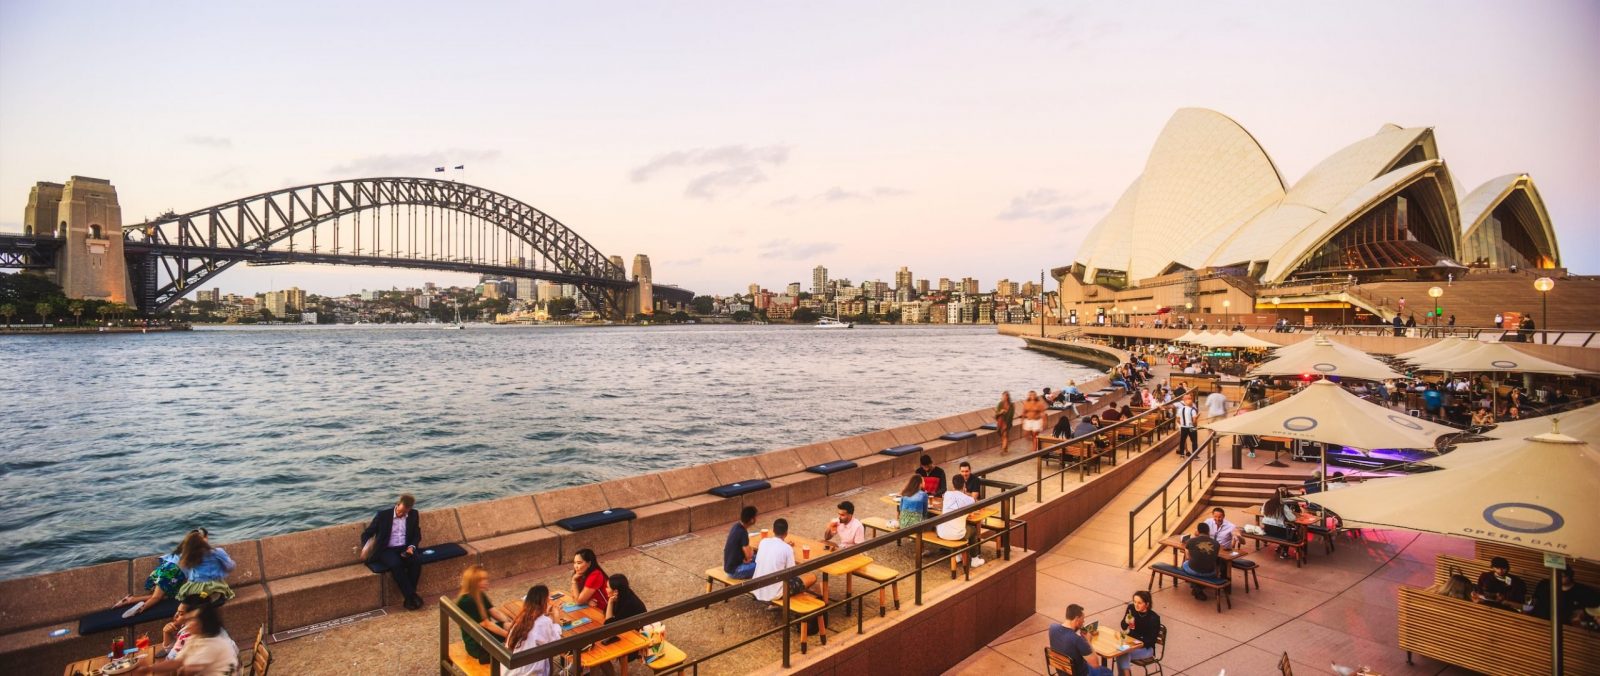 Panoramic view of Sydney Opera House and Harbour Bridge from the Opera Bar.